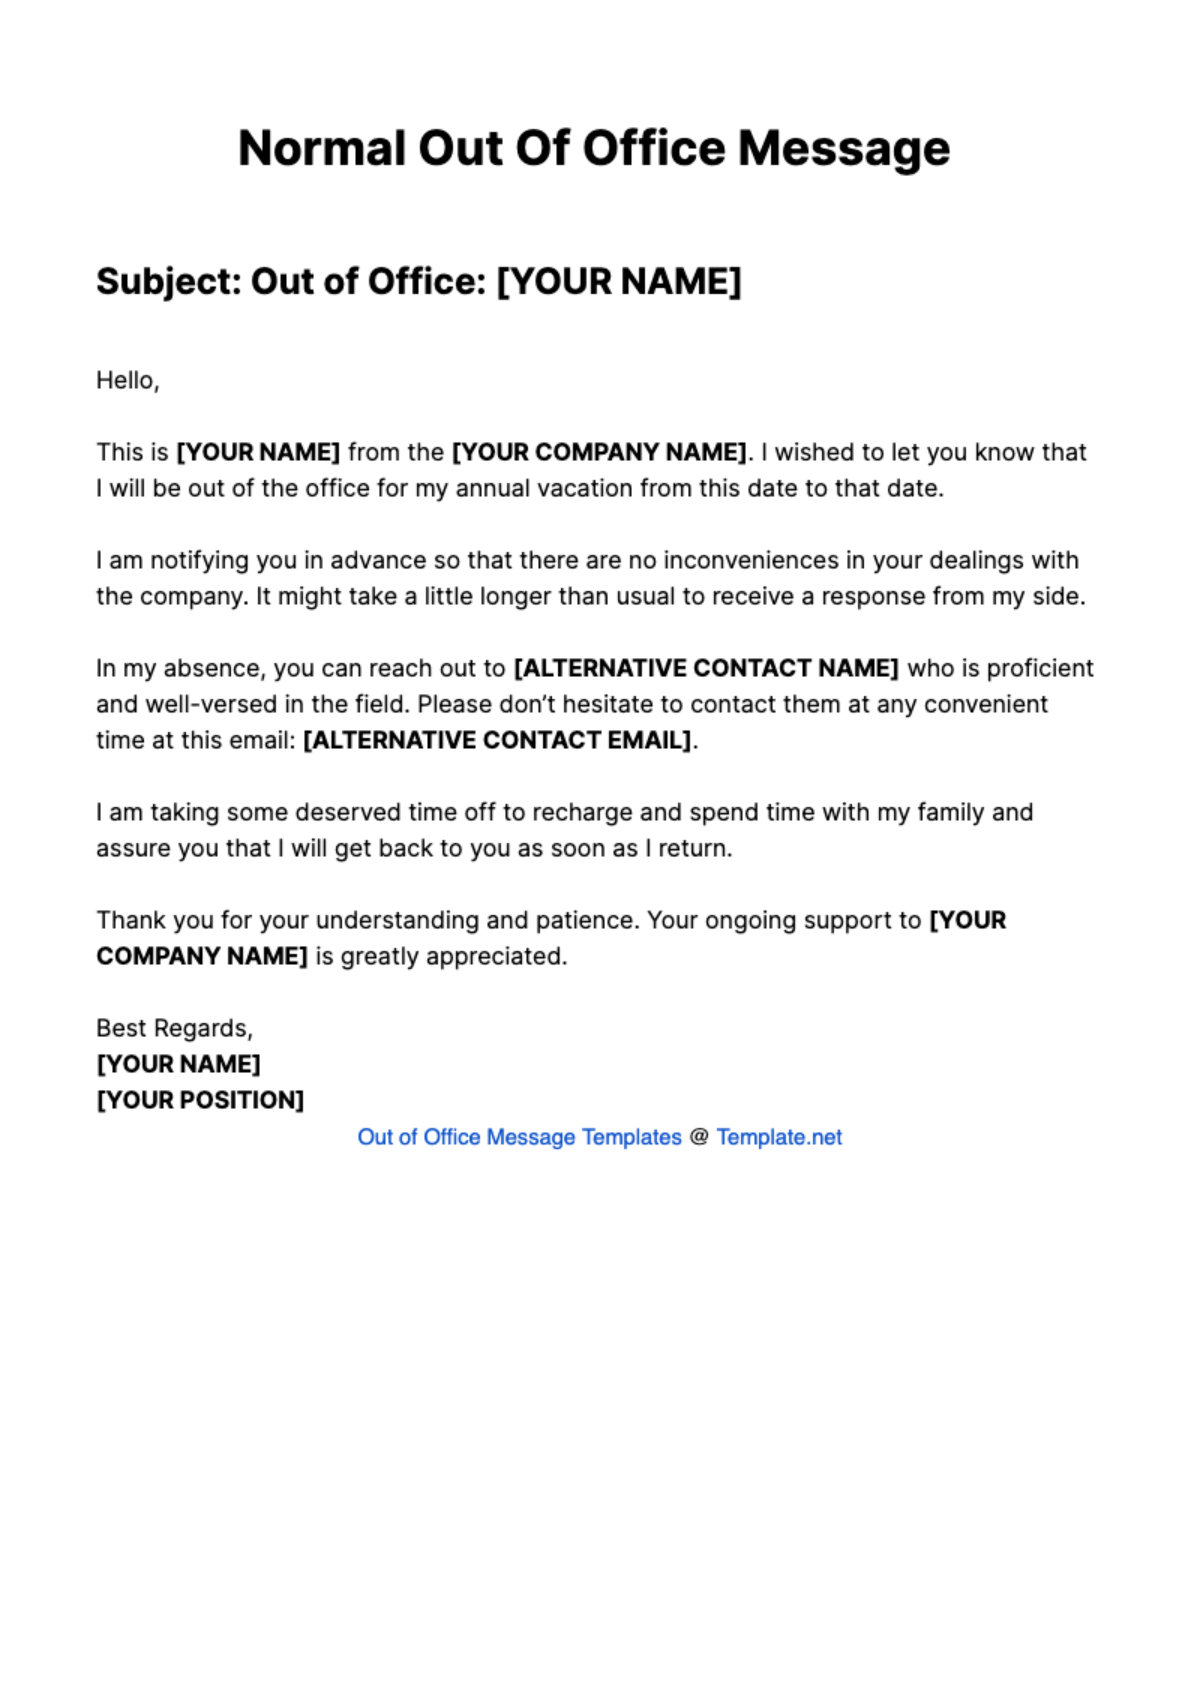 Normal Out Of Office Message Template